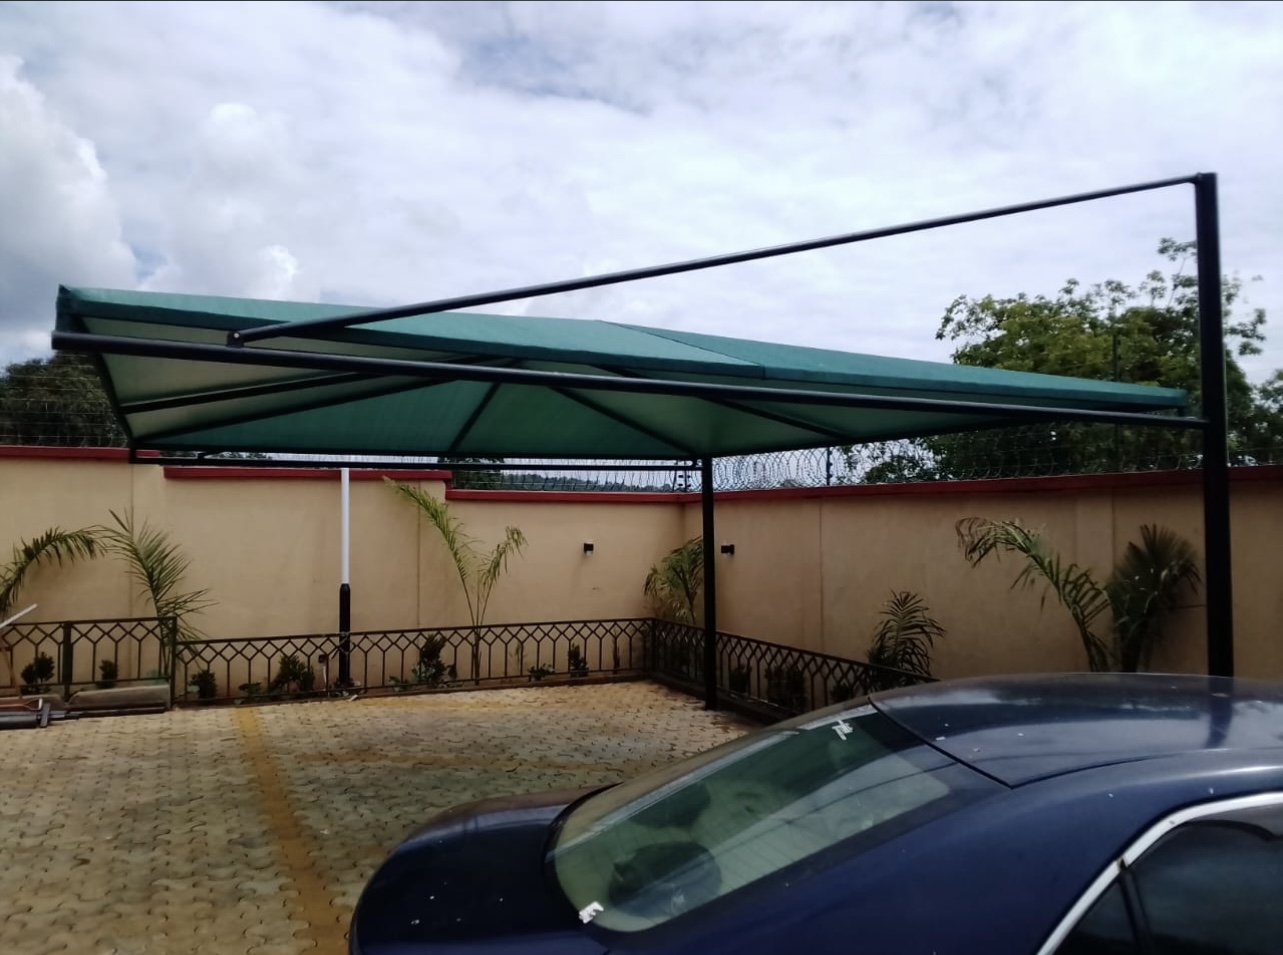 Unique and Modern Carports-Parking Shades-Vehicle Shade Canopies-Cantilever and Curved Shed designs-Waterproof Shade Net Car Covers-Commercial and Residential Car Shade Installers In Nairobi Kenya